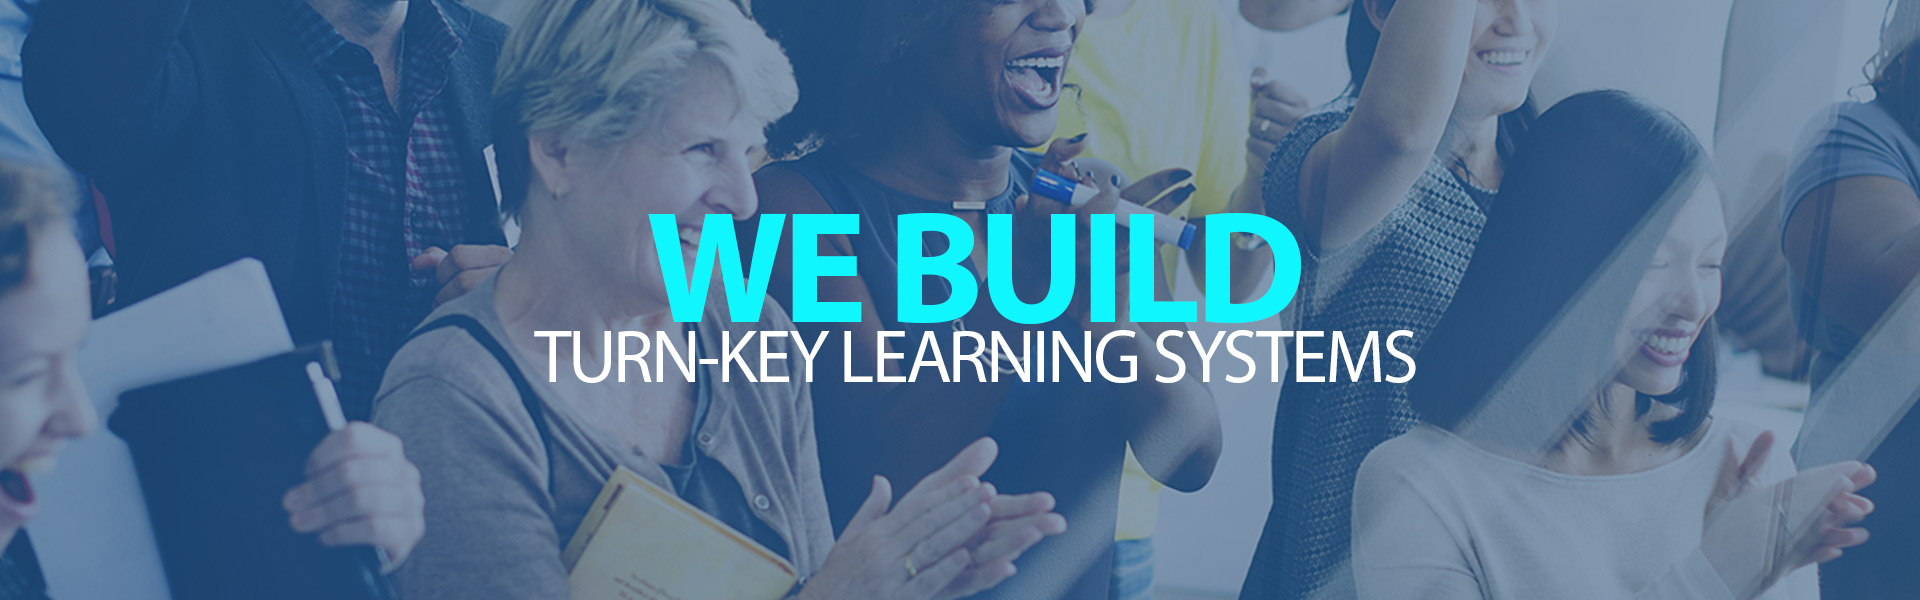 We Build Turn-Key Learning Systems